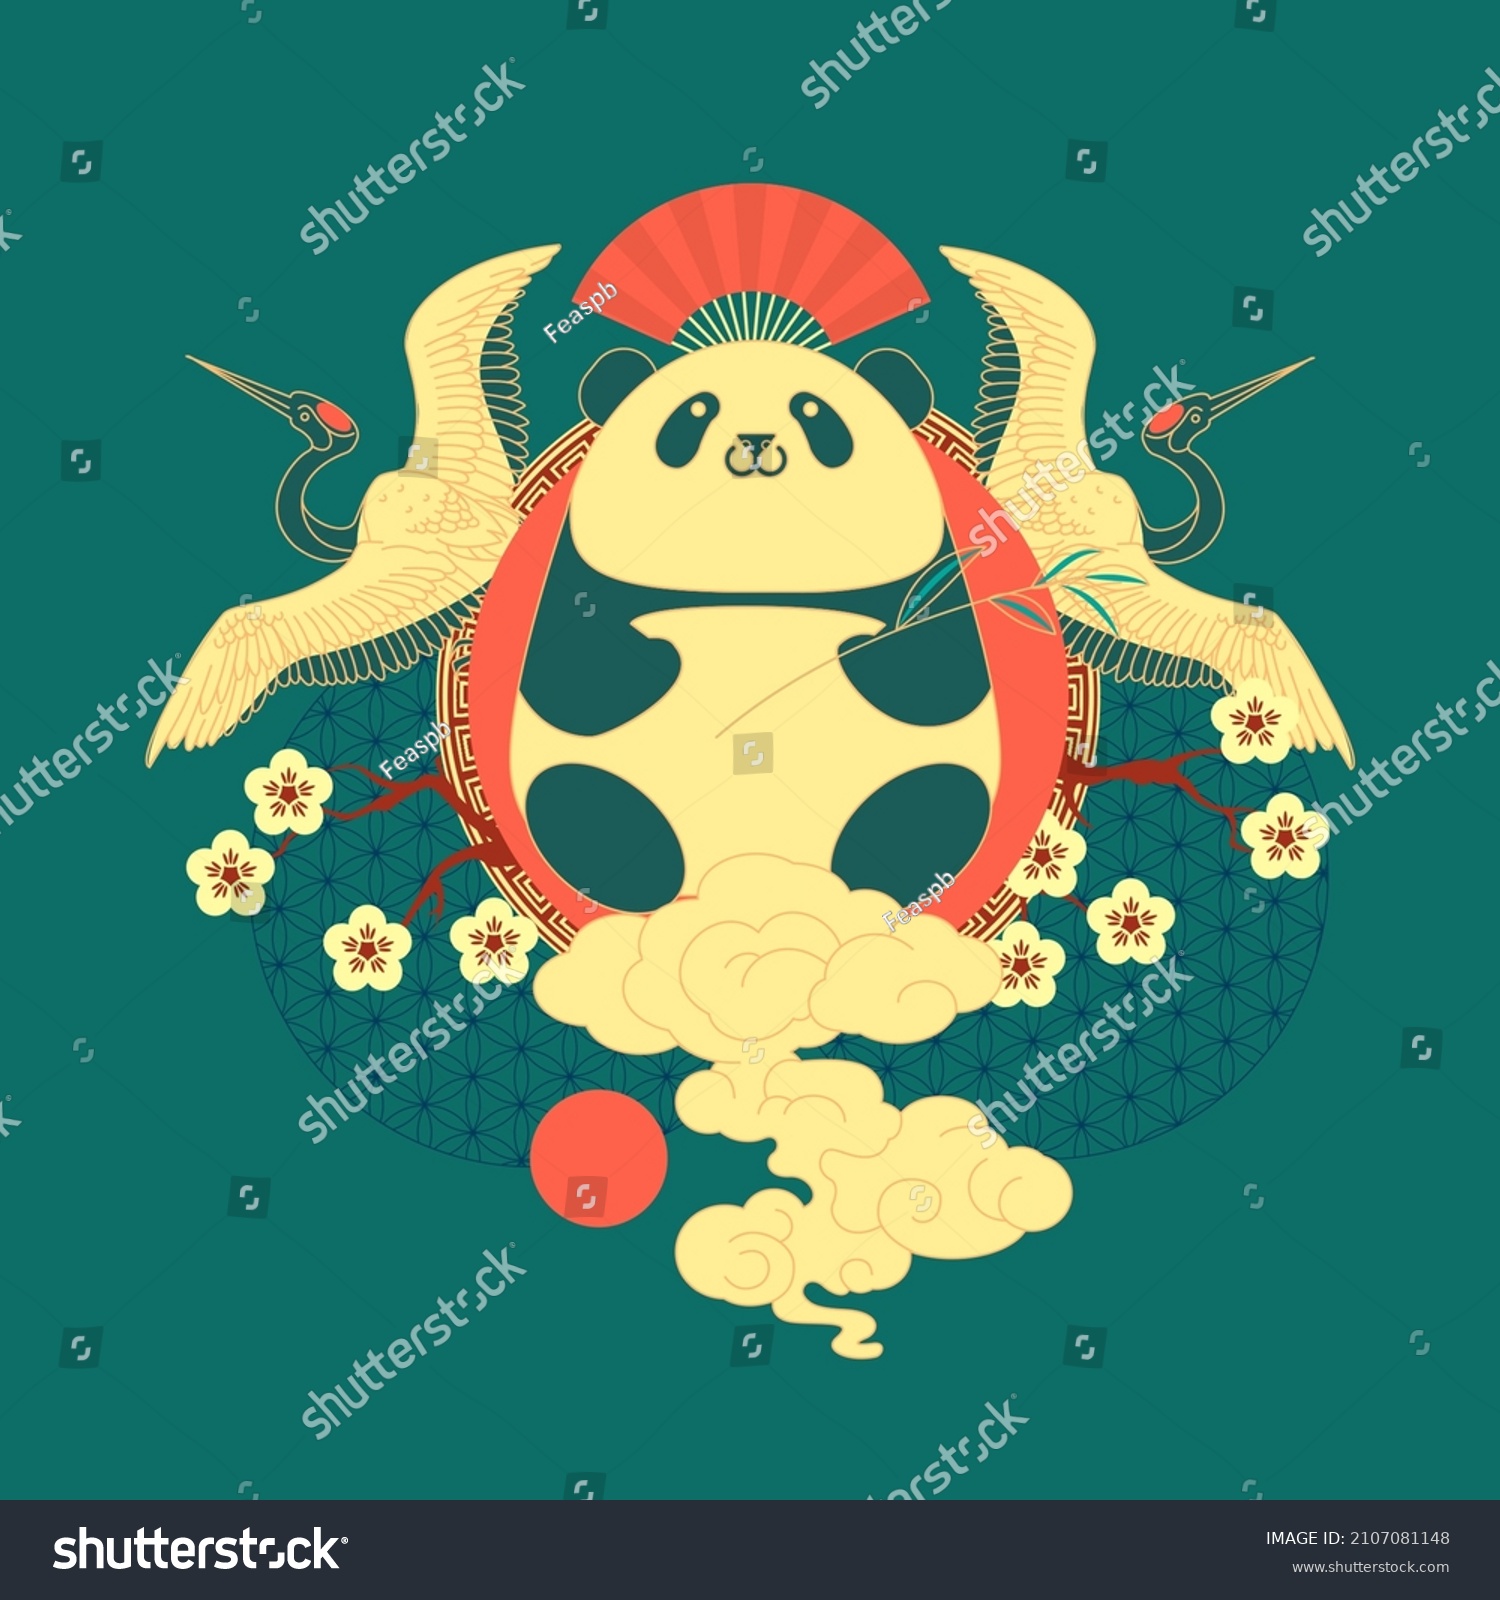 SVG of China illustration with panda bear, flying cranes, fan, clouds and sun. Traditional Chinese graphic element. svg